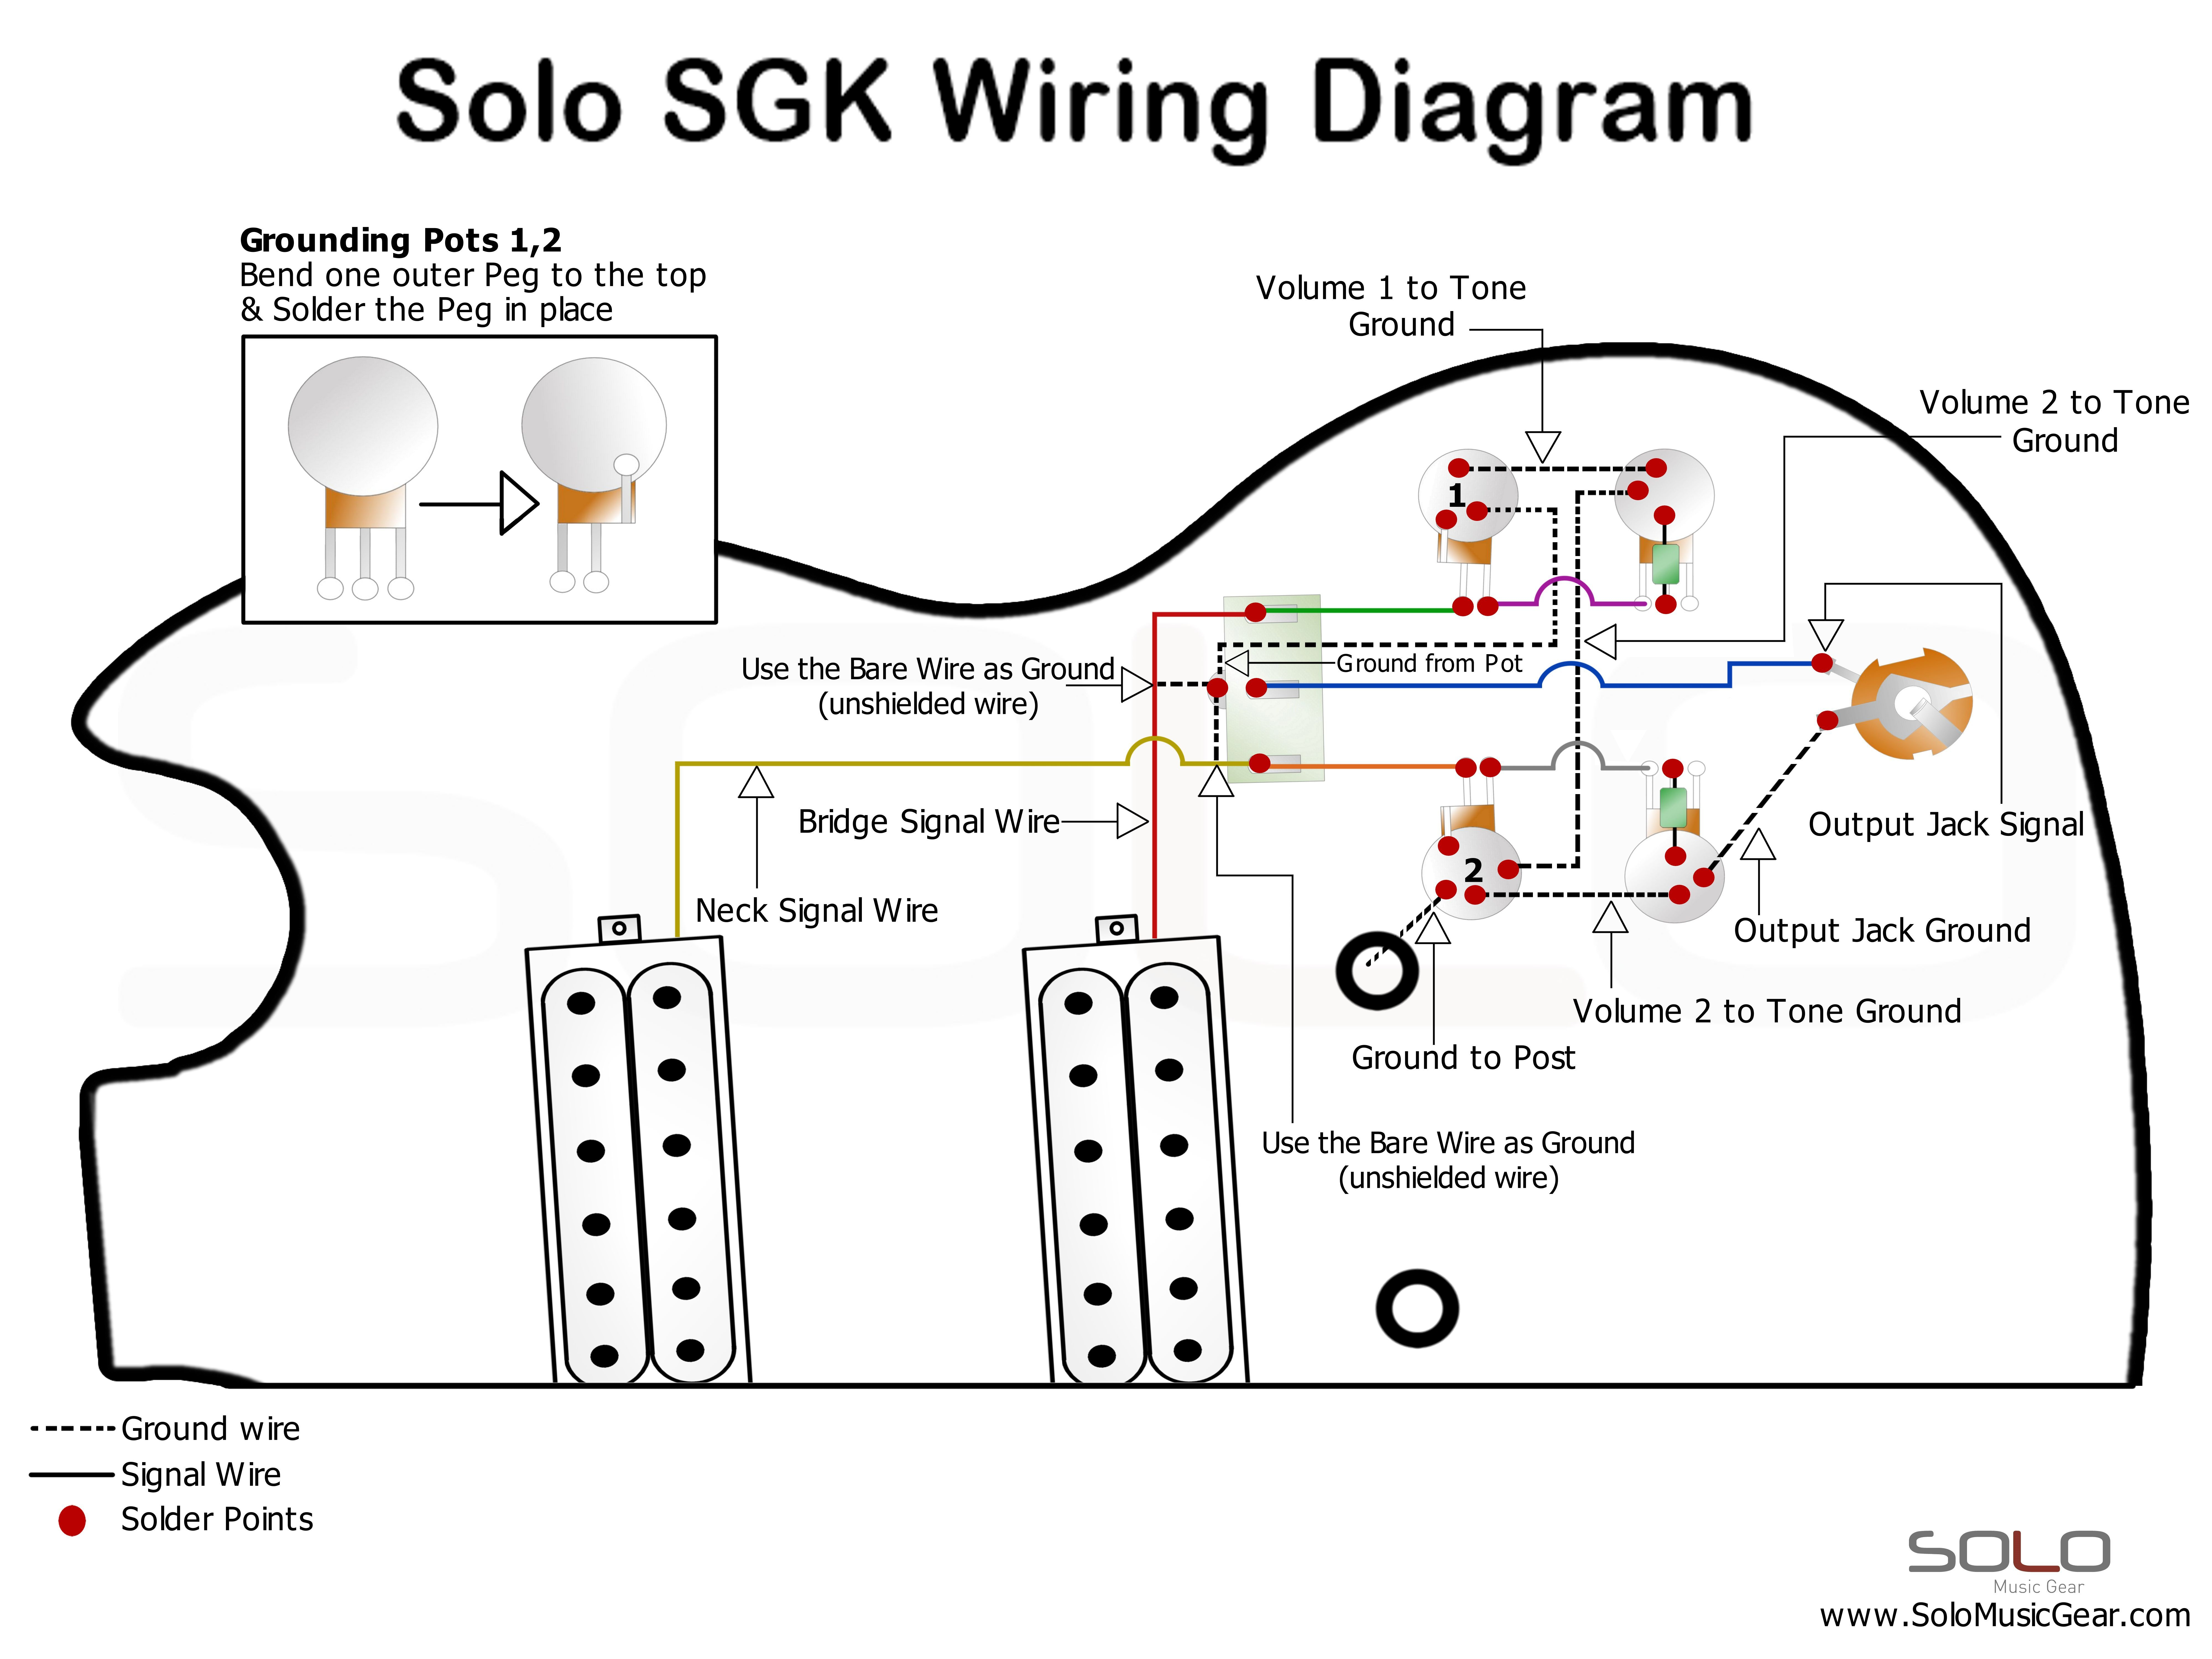 Pinsolo Music On Wiring Diagrams | Wire, Diagram - Sg Wiring Diagram